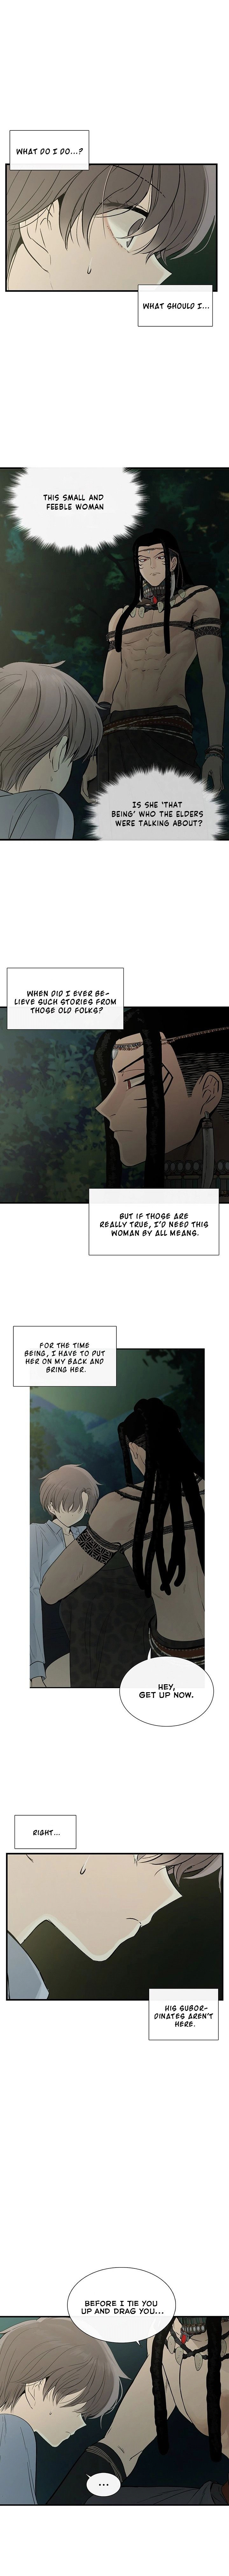 Totem Realm - Chapter 7 Page 4